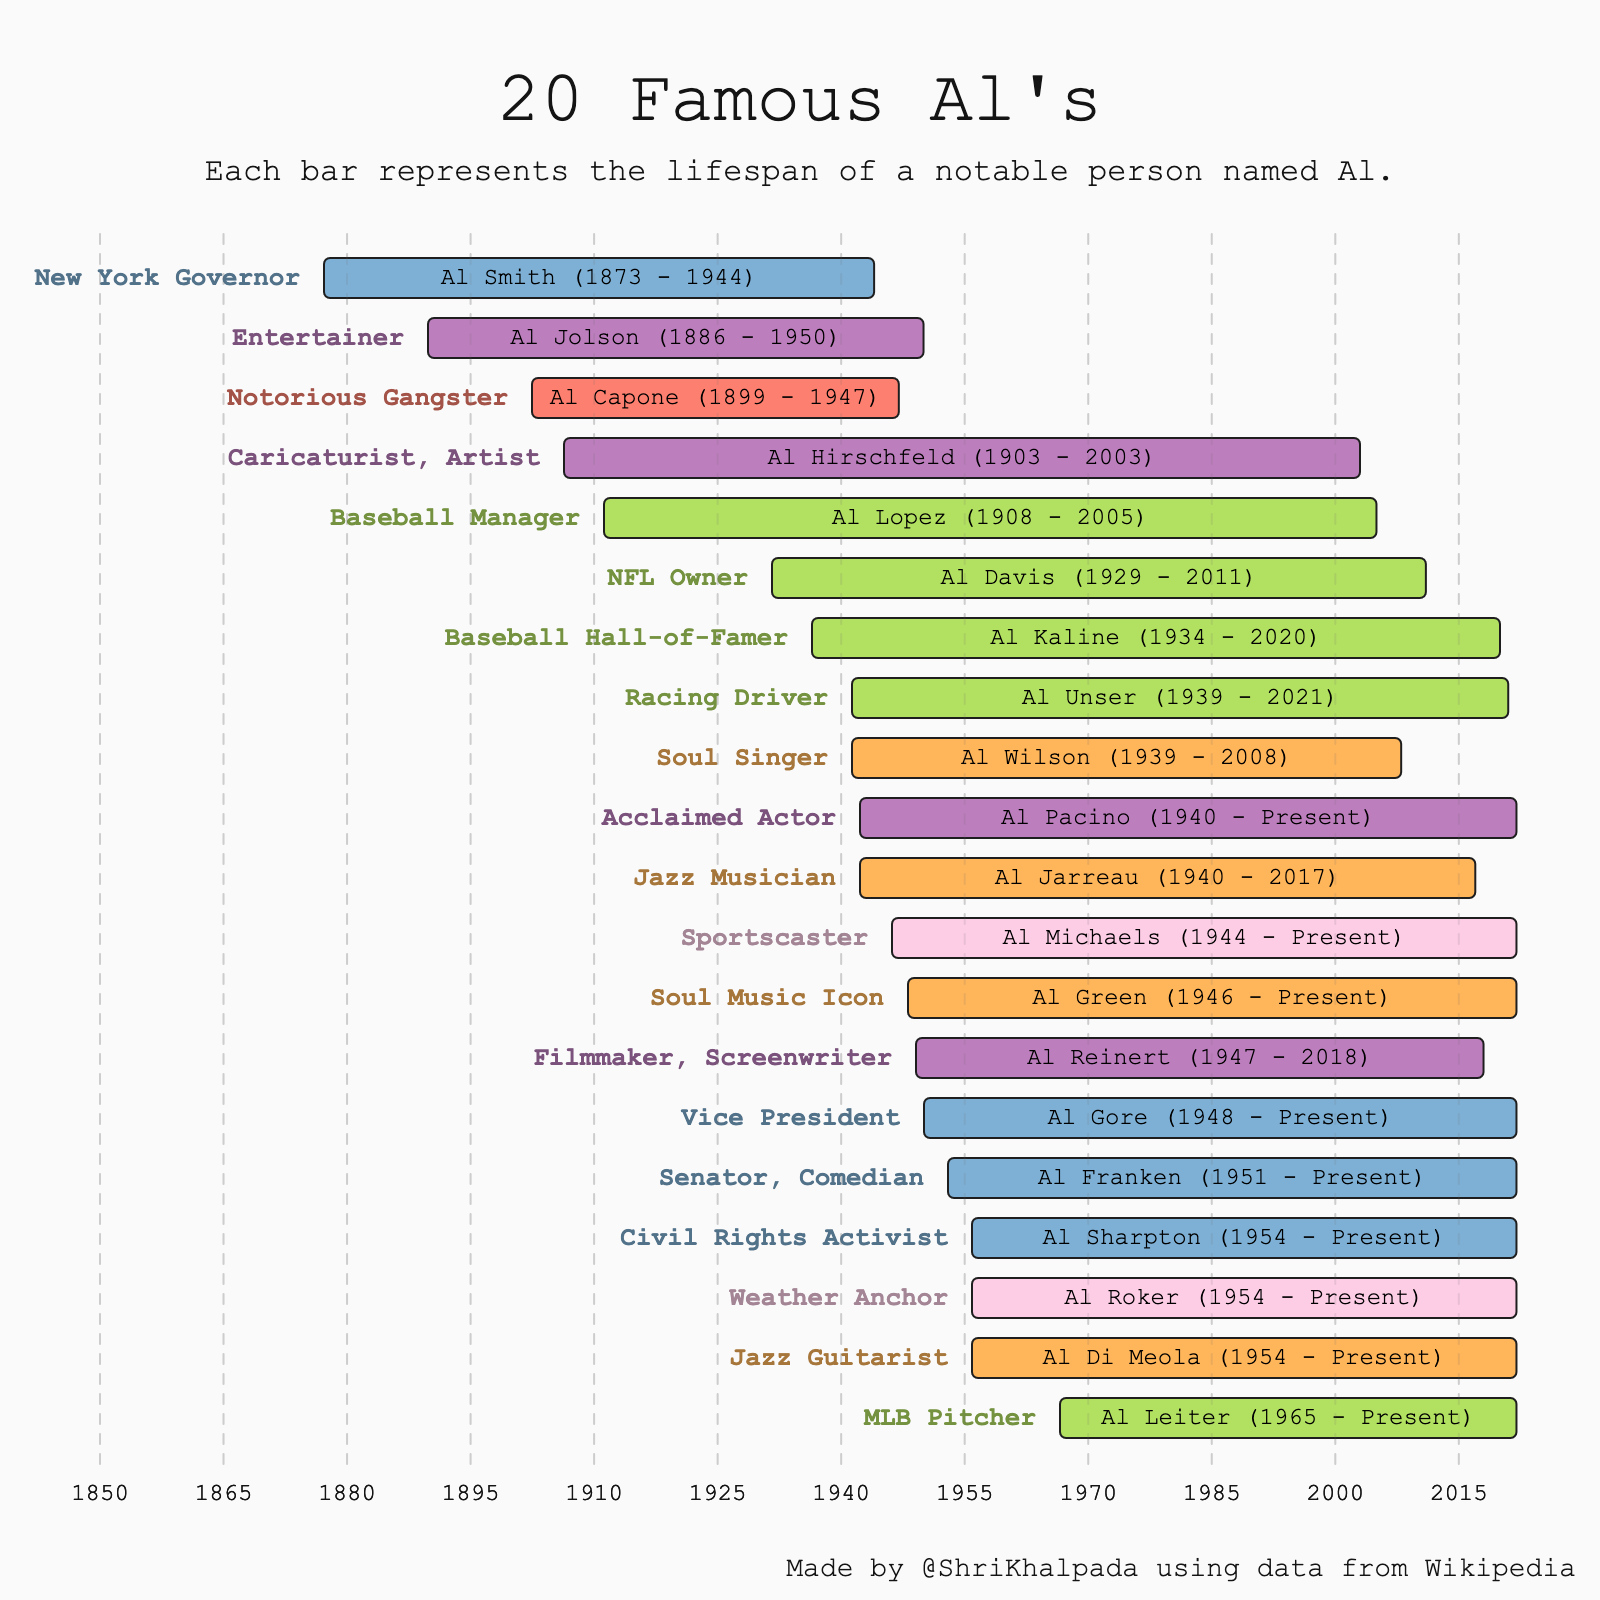 A horizontal bar chart titled "20 Famous Al's" showing the lifespans of notable individuals named Al, with each bar's length corresponding to the duration of their life.